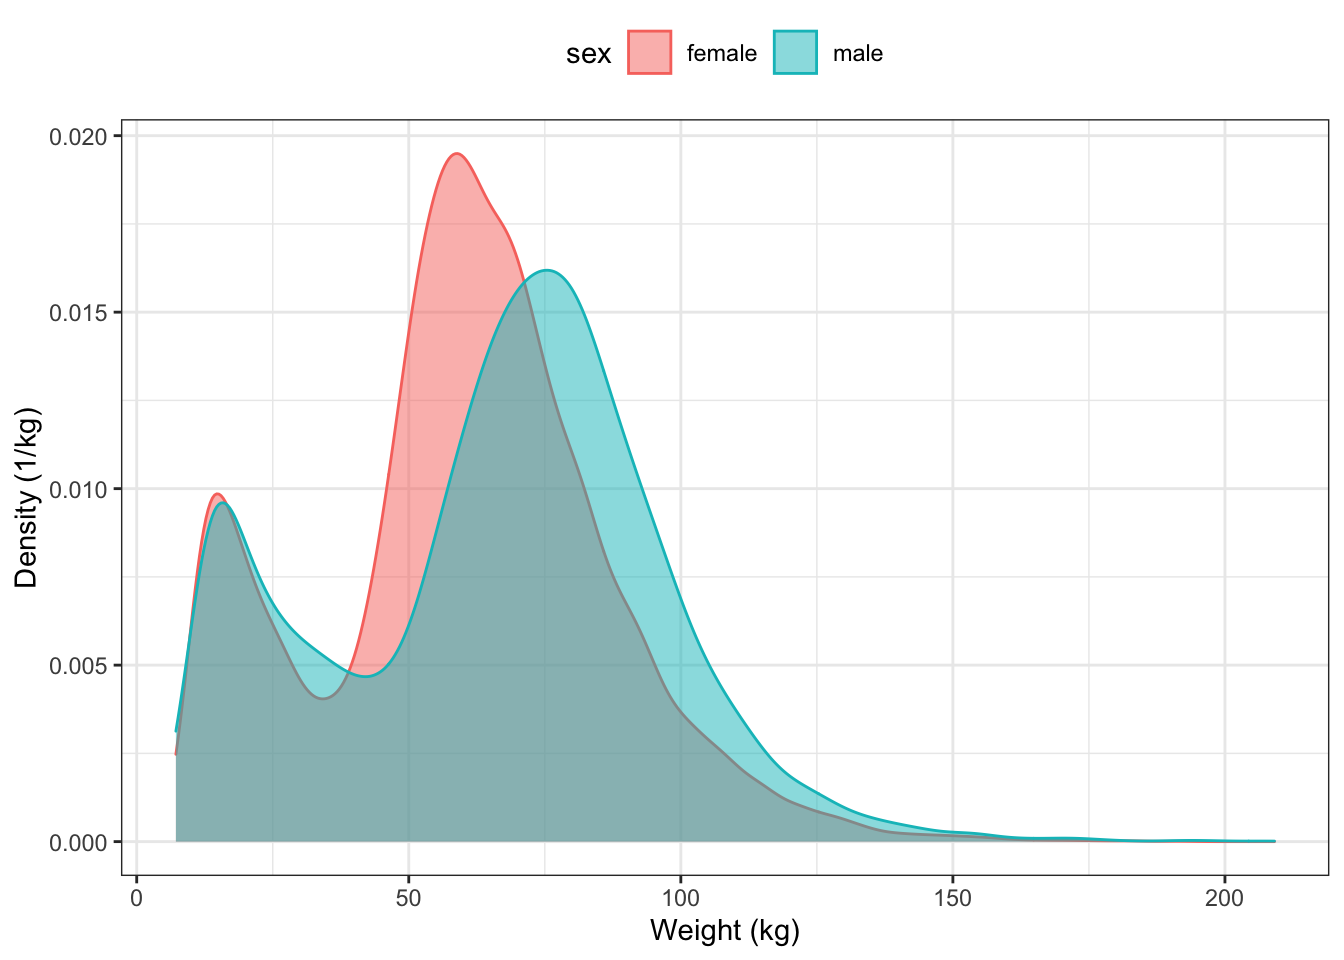 Comparing the distributions for body weight between males and females in the NCHS data.